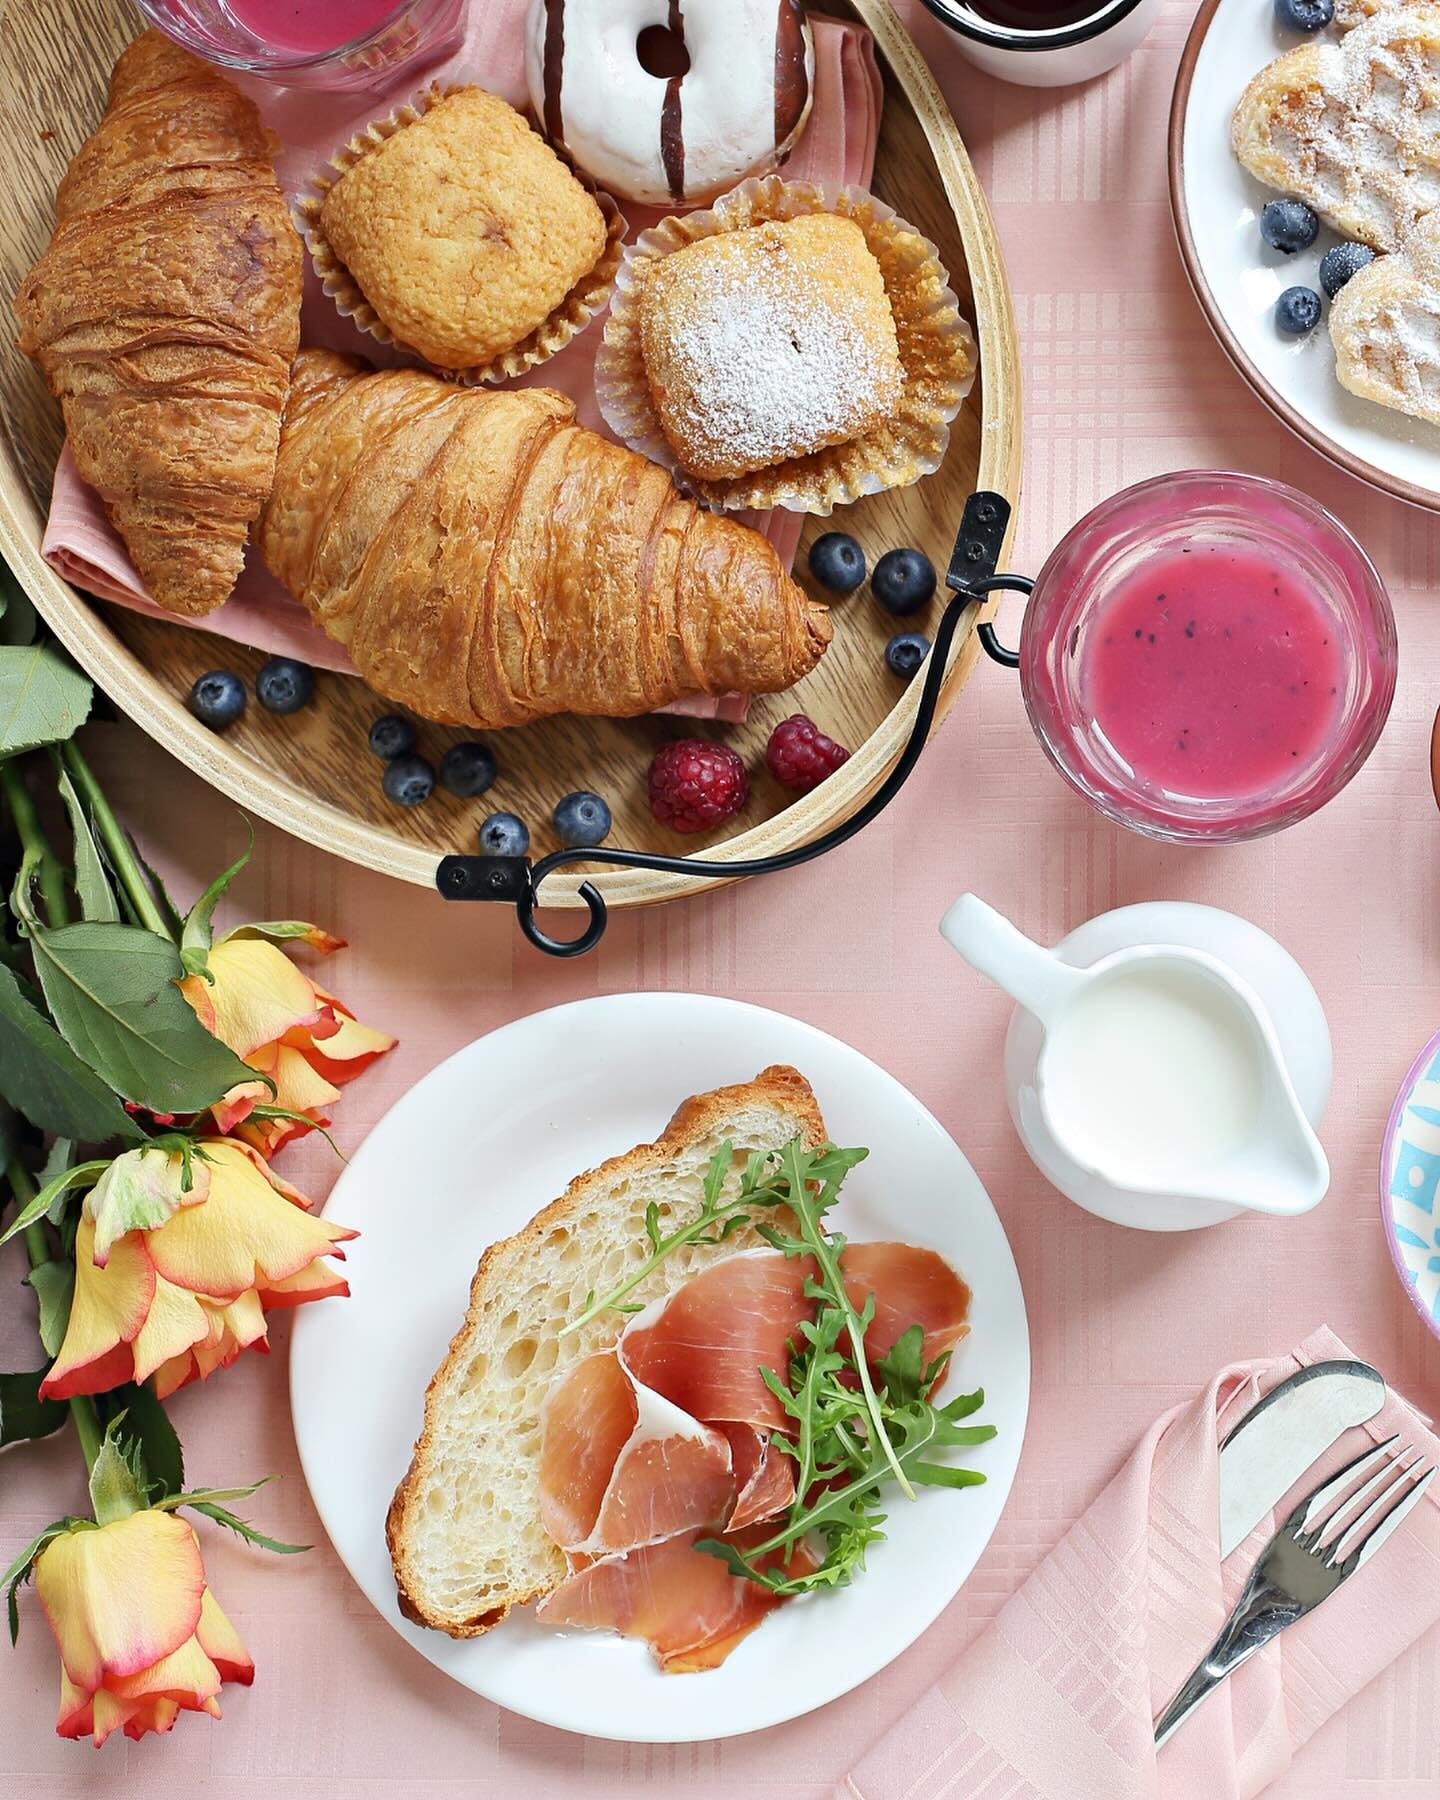 WE LOVE A COLLABORATION!

@cnywomensnetwork is proud to co-host @colgateinnny&rsquo;s Mother&rsquo;s Day brunch buffet, featuring a selection of starters, salads, breakfast and lunch entrees, carving station favorites, and irresistible desserts.

Eve